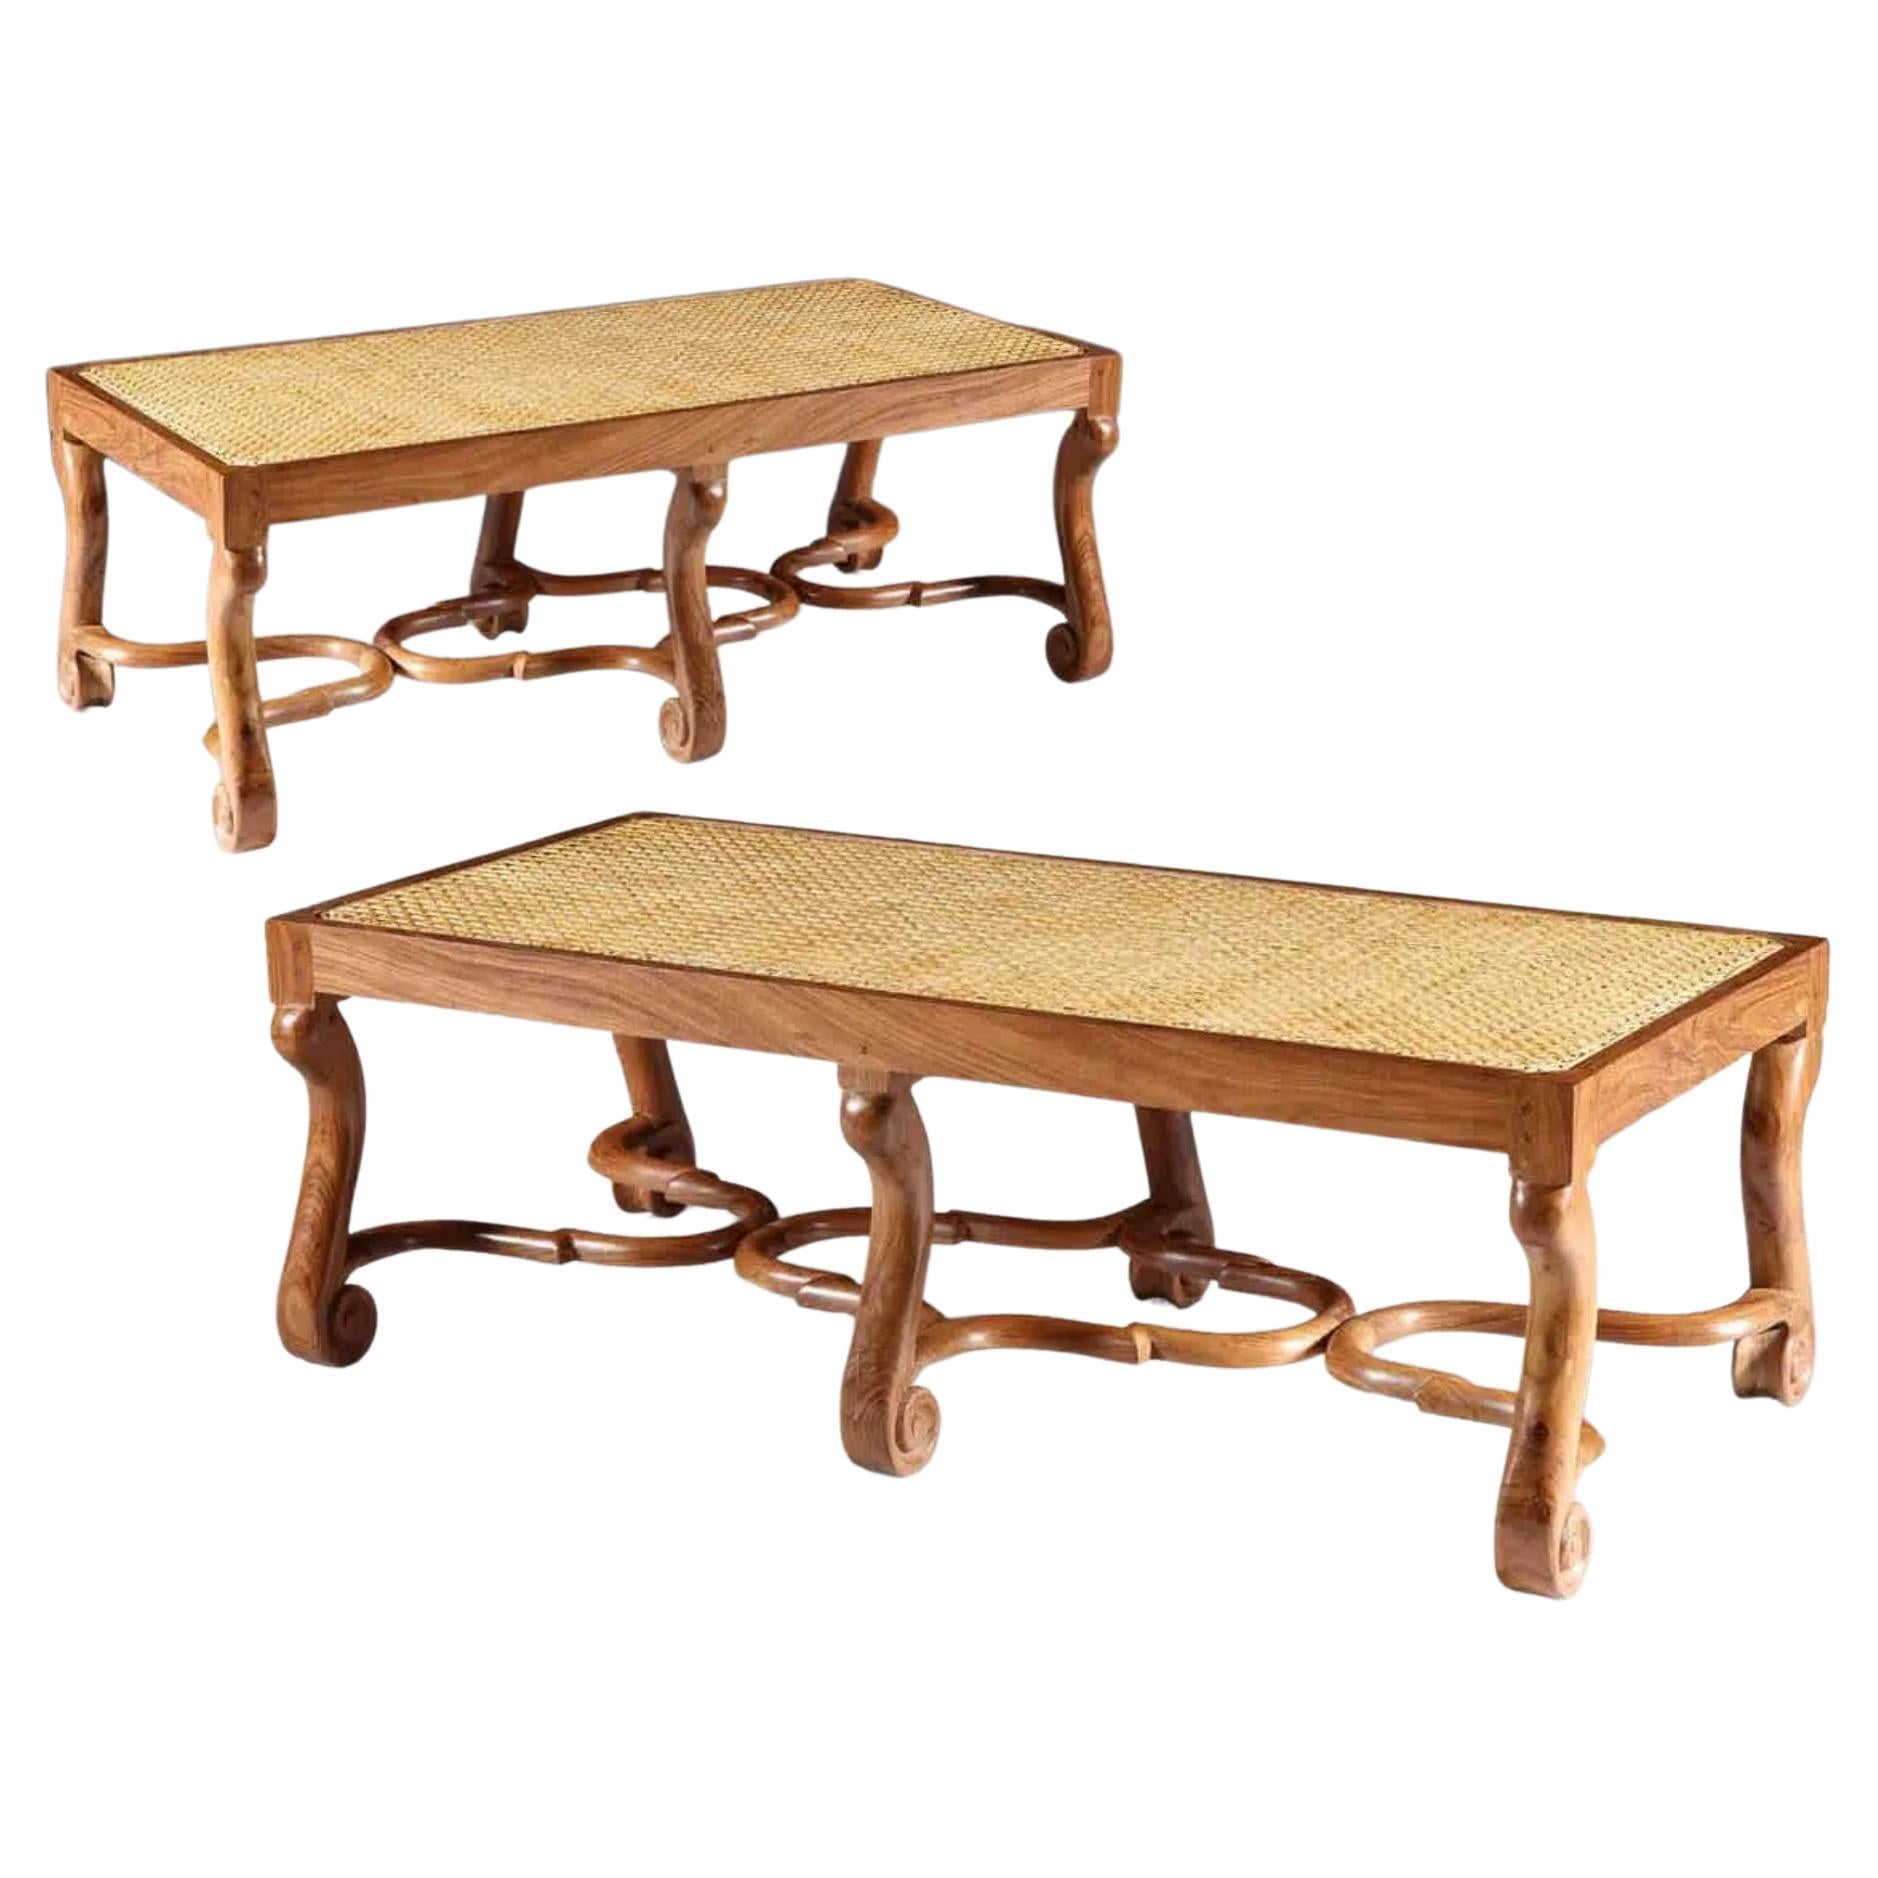 Pair of Walnut Long Caned Benches, 20th Century